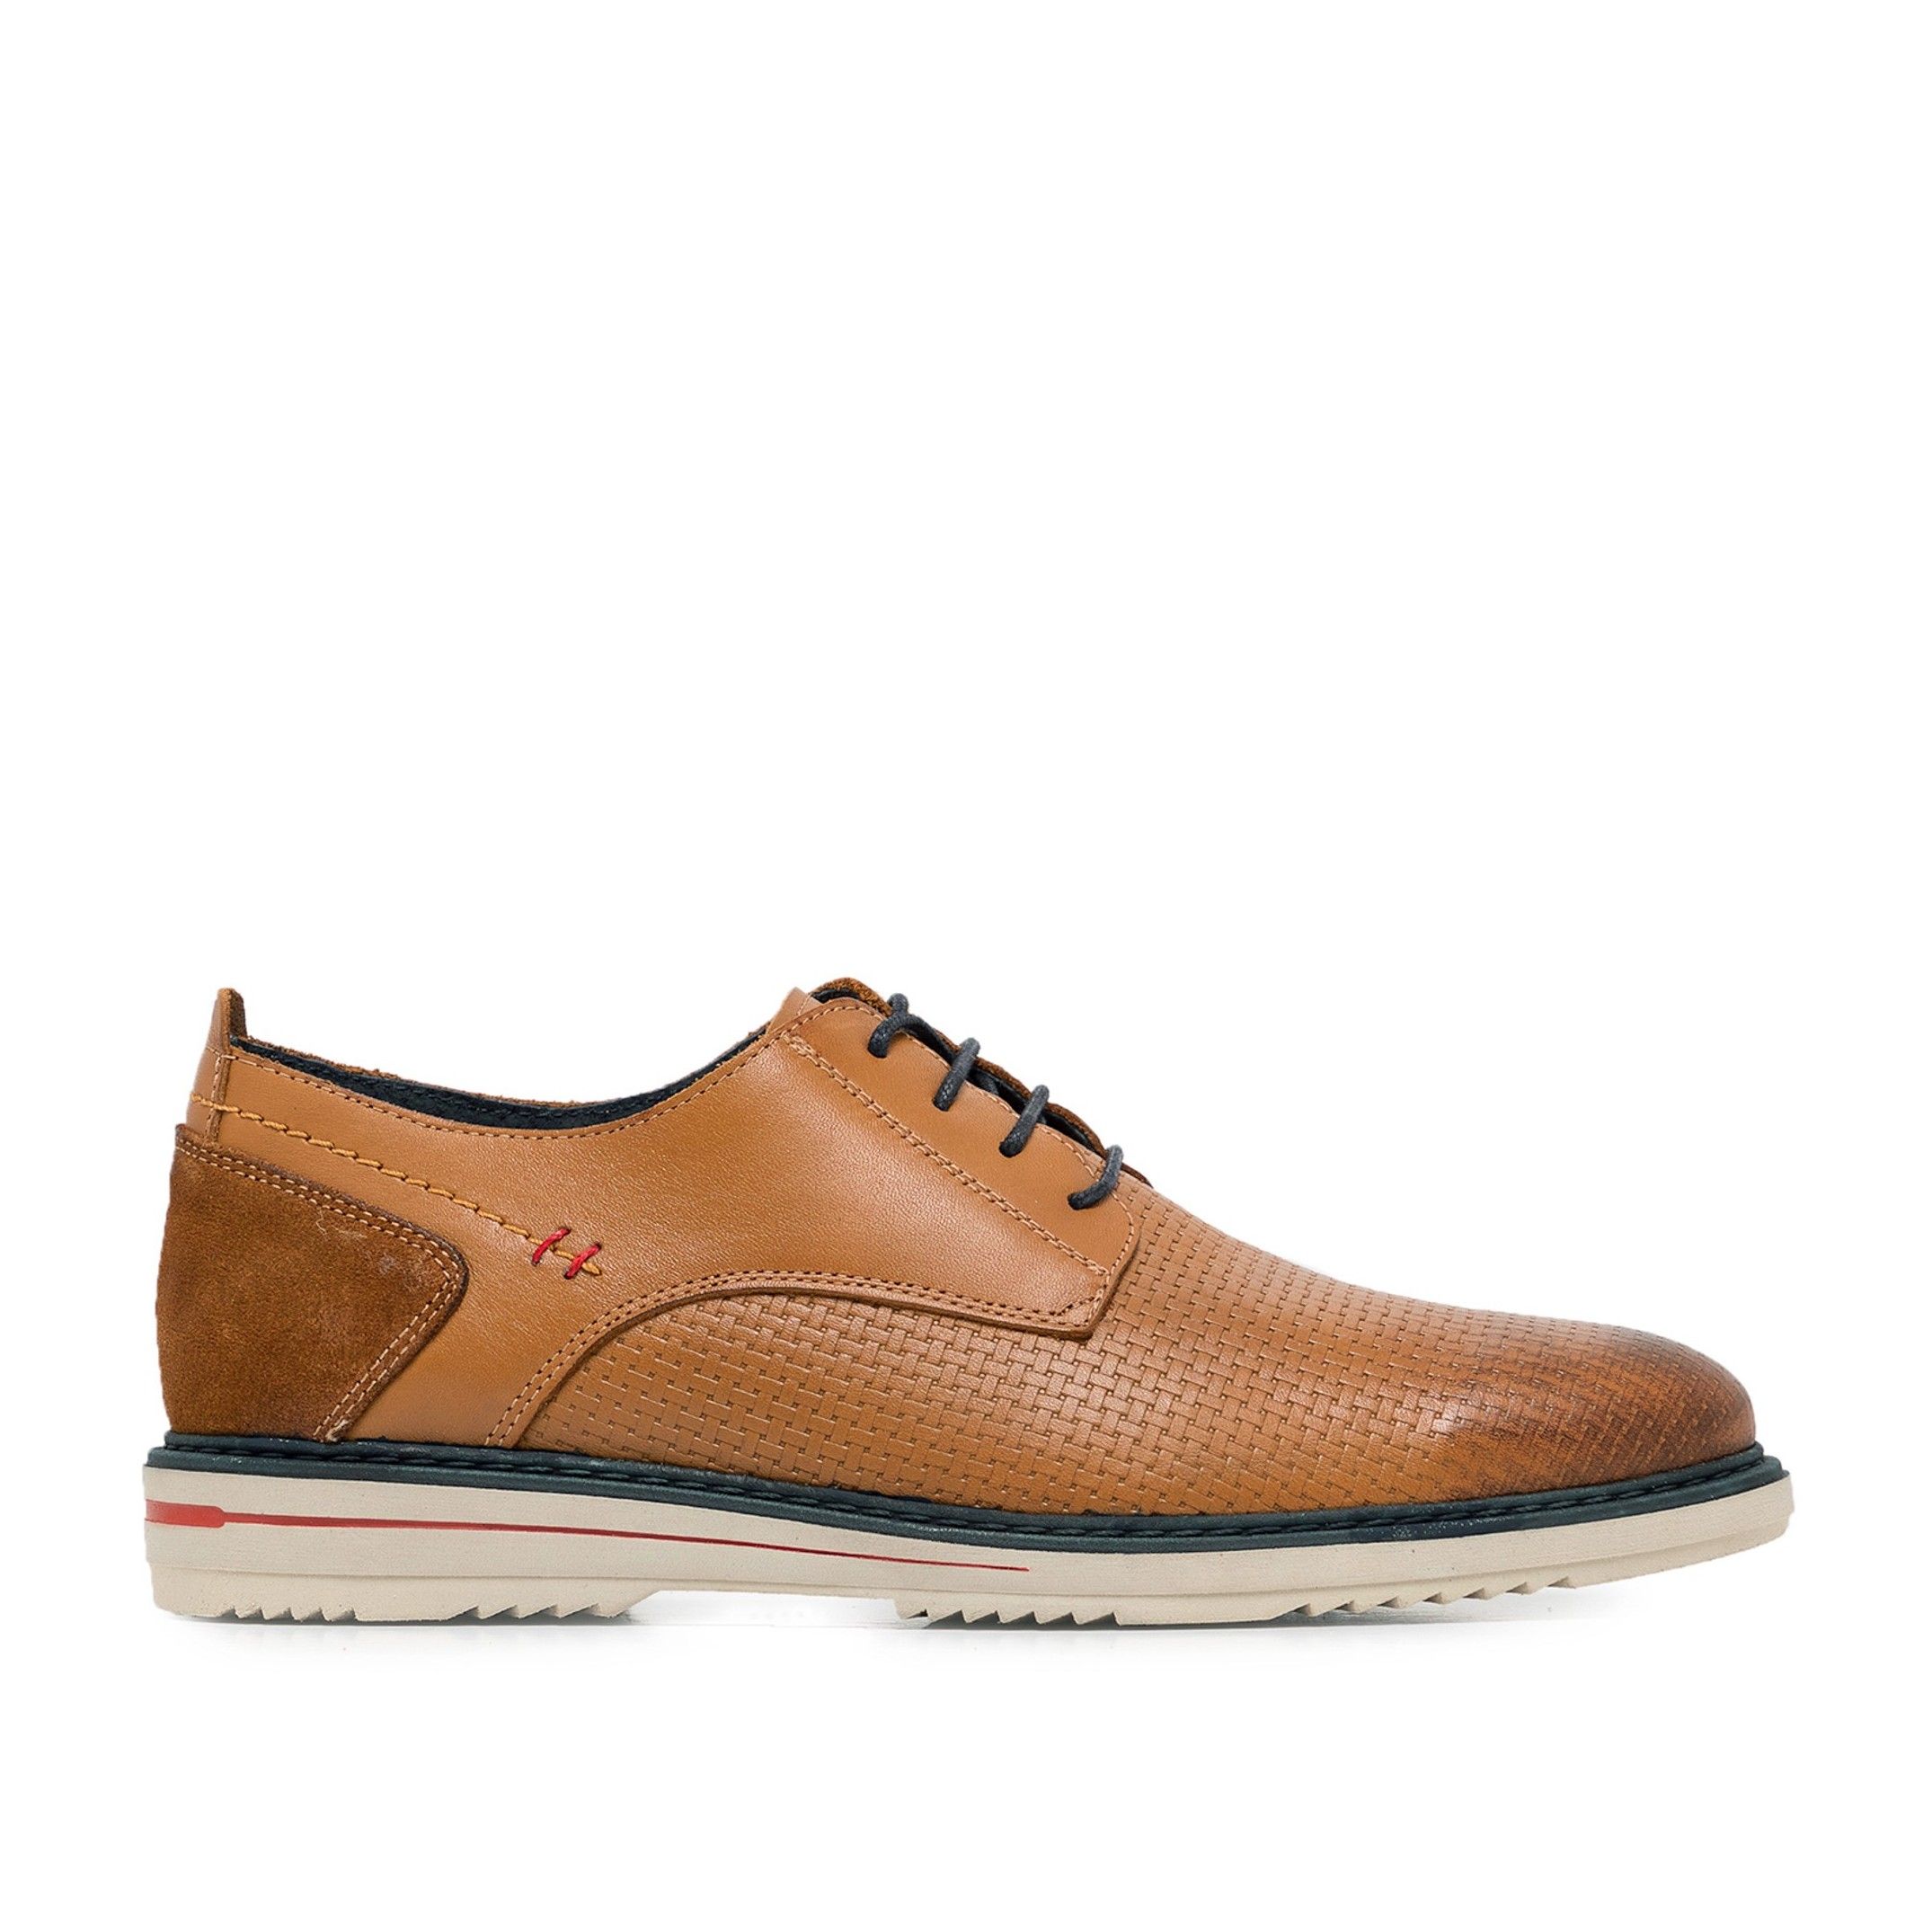 Lace up shoes by Son Castellanisimos. Upper made of nappa leather. Inner and insole made of cowhide leather. Sole material: synthetic and non slip. Heel height: 2,5 cm. Designed and made in Spain.